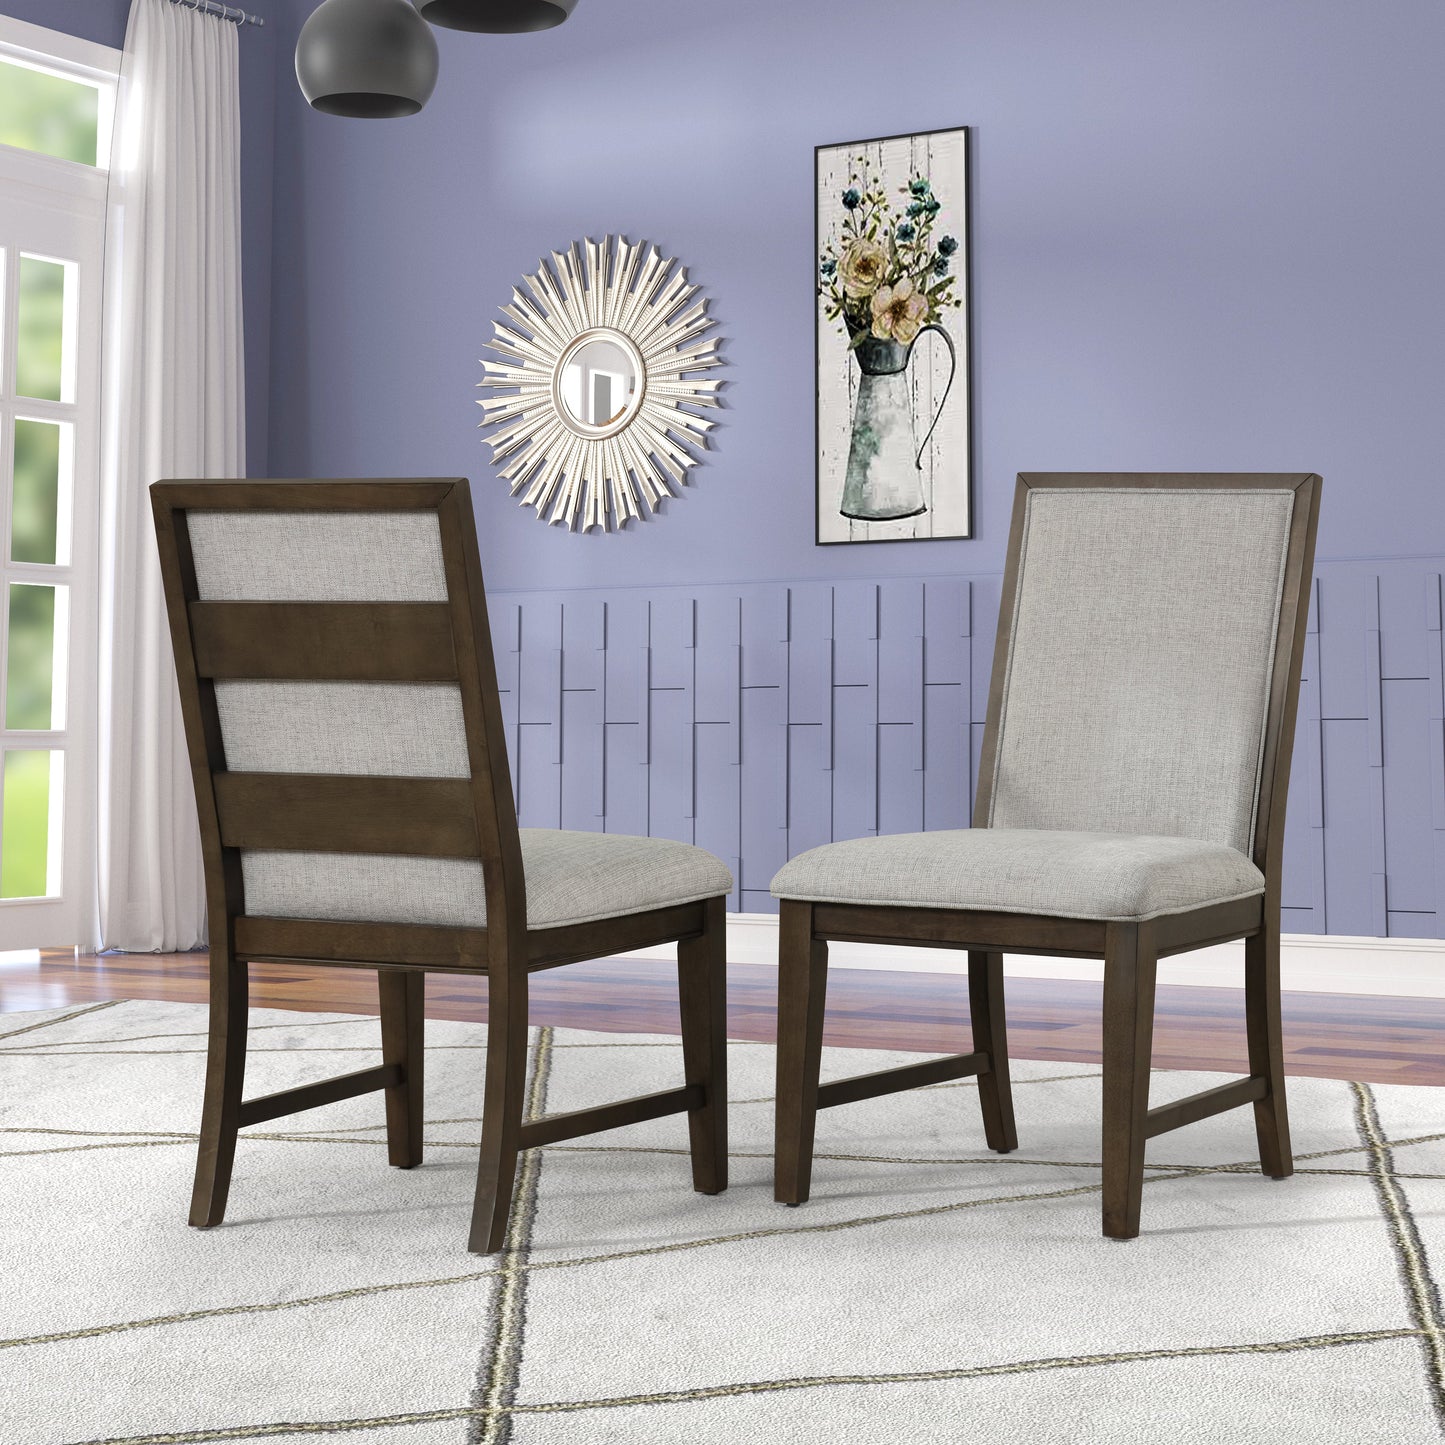 Roundhill Furniture Aberll Wood Dining Room Set, Table with 6 Side Chairs, Gray